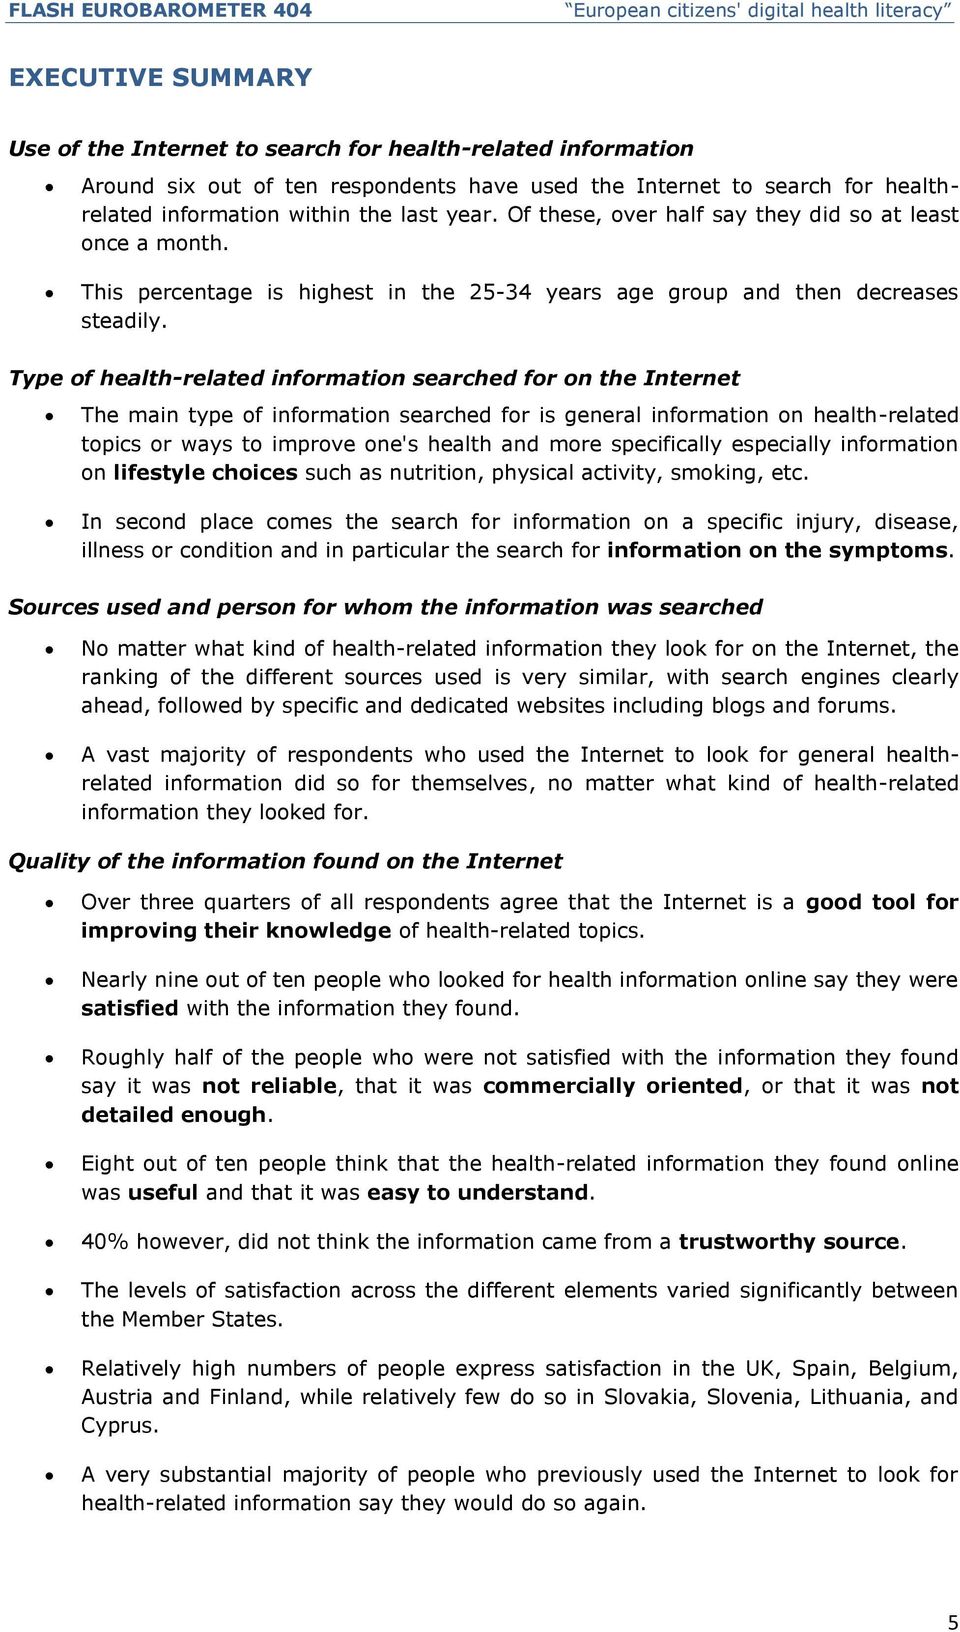 Type of health-related information searched for on the Internet The main type of information searched for is general information on health-related topics or ways to improve one's health and more